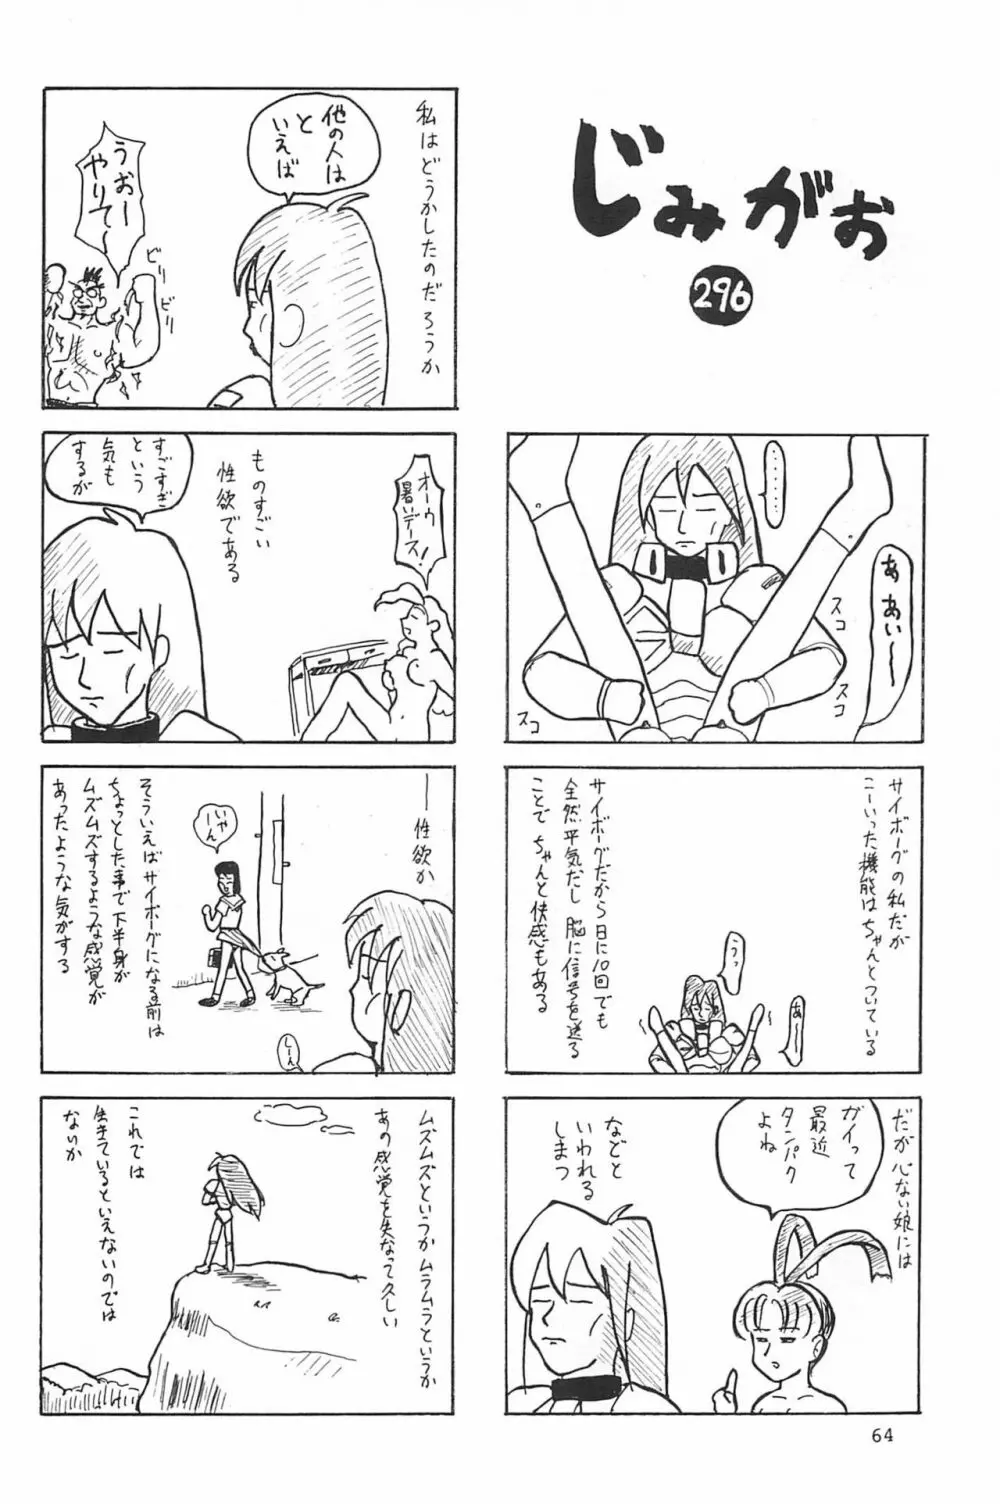 ND-special Volume 1 64ページ